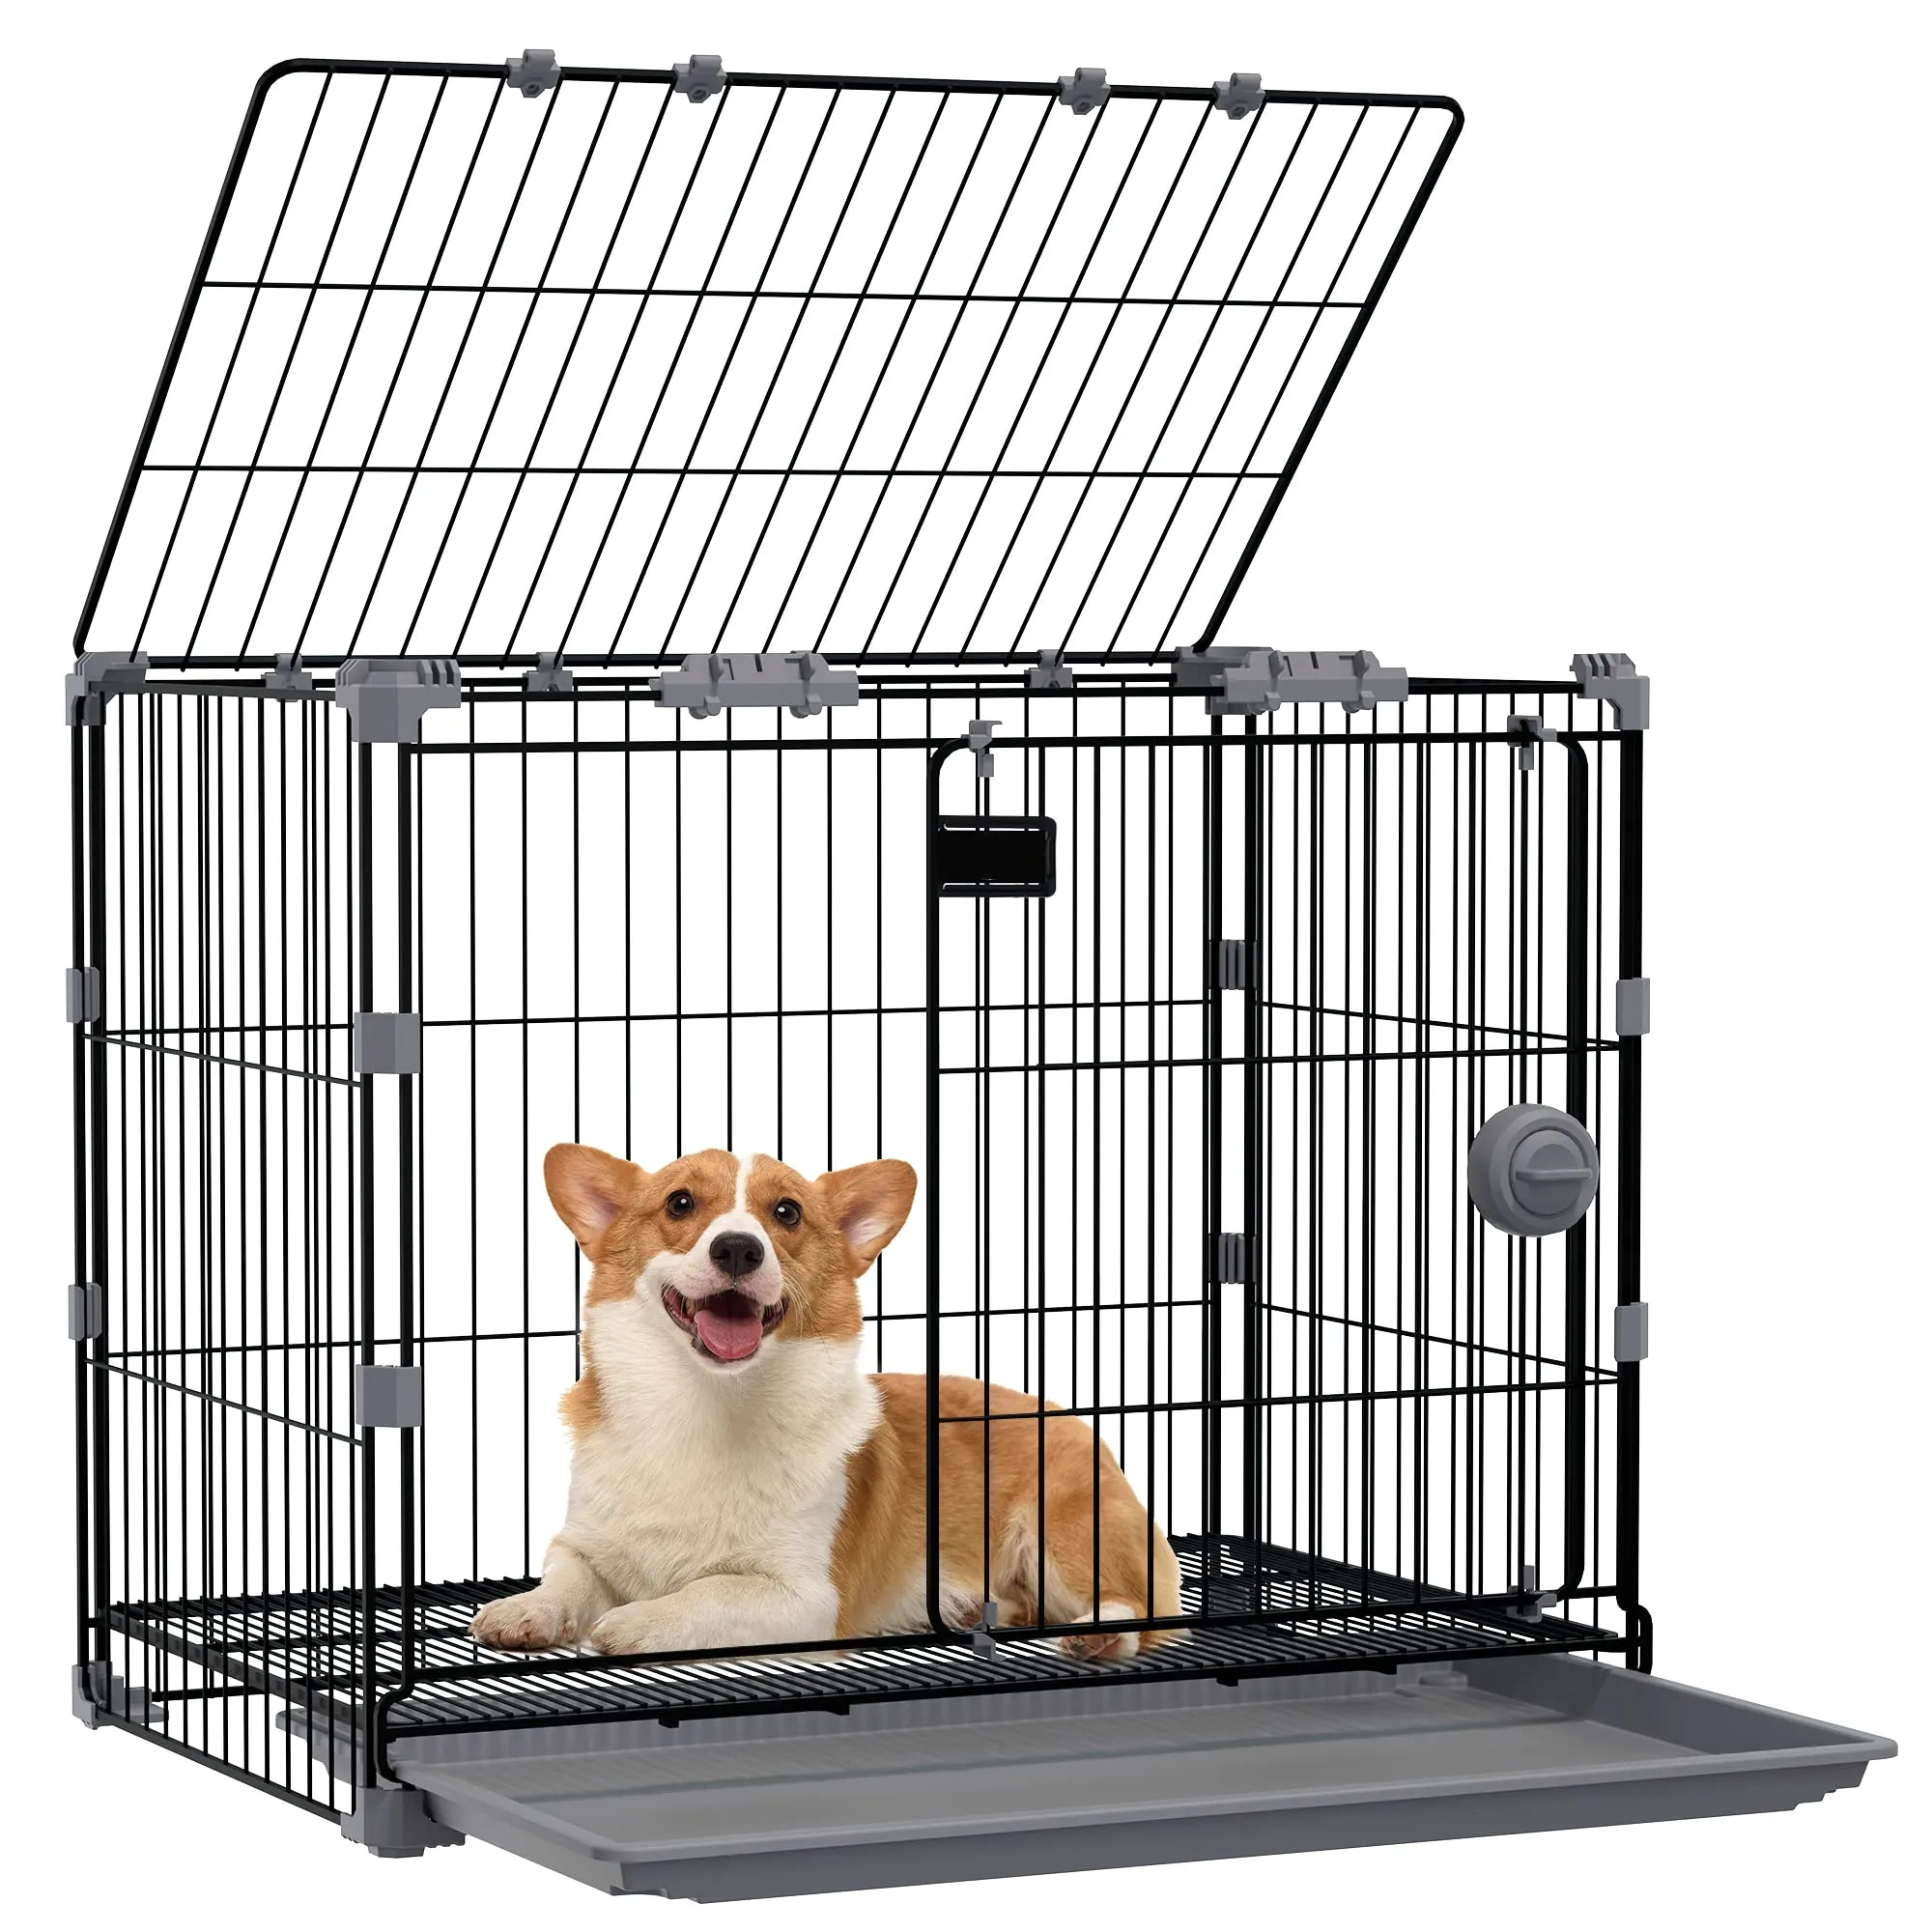 Hot Selling Dog House & Furniture Portable Pop Up Or Cat Show Tent Carrier And Cage Top Load Transport Pet Crate